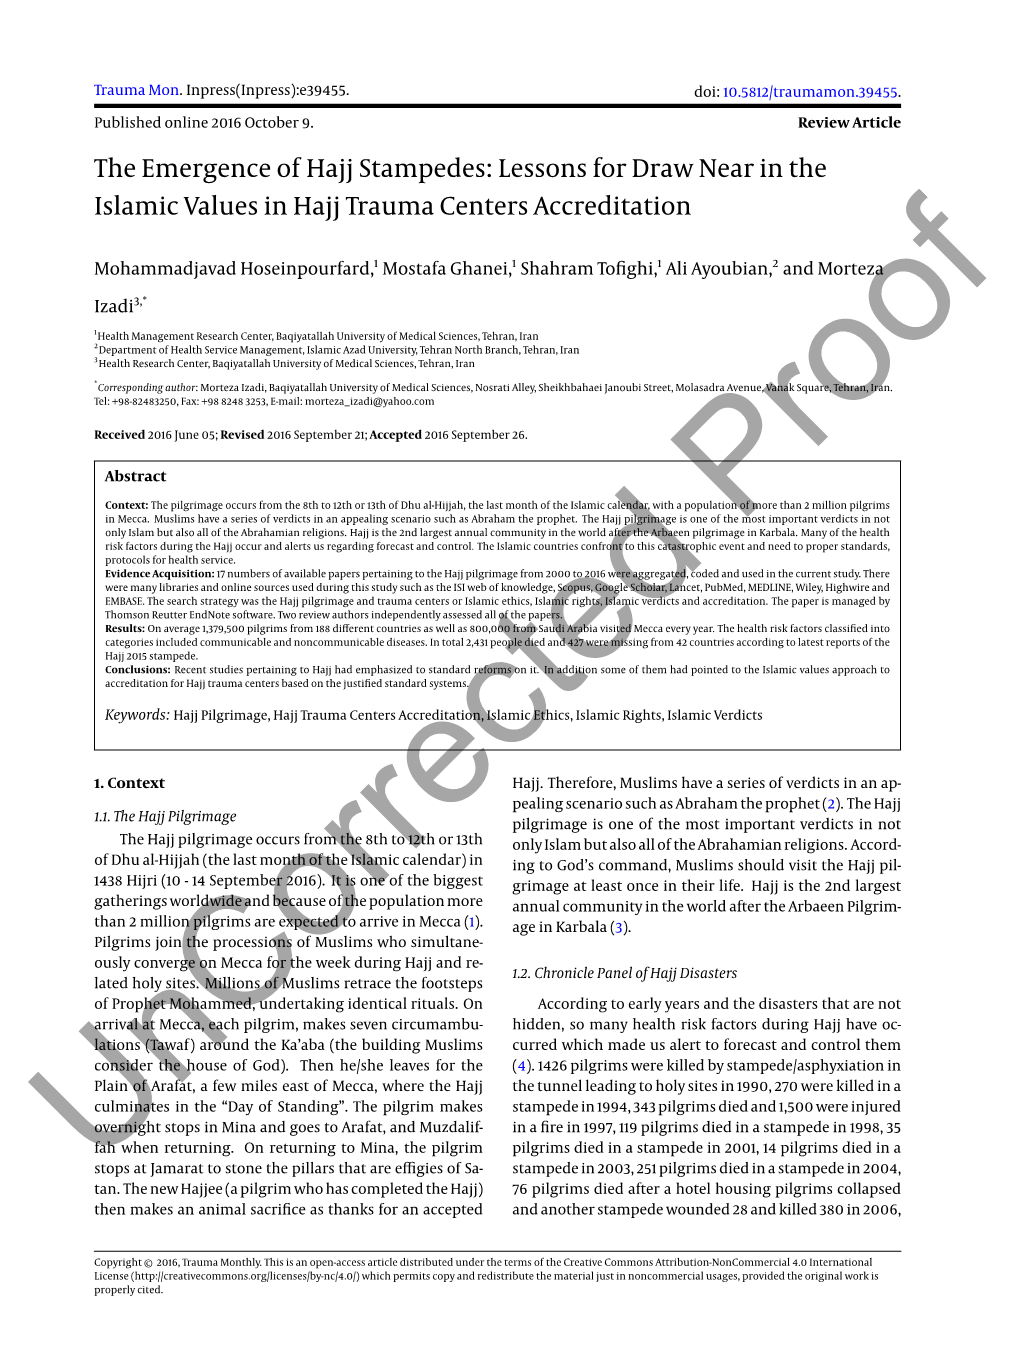 Lessons for Draw Near in the Islamic Values in Hajj Trauma Centers Accreditation